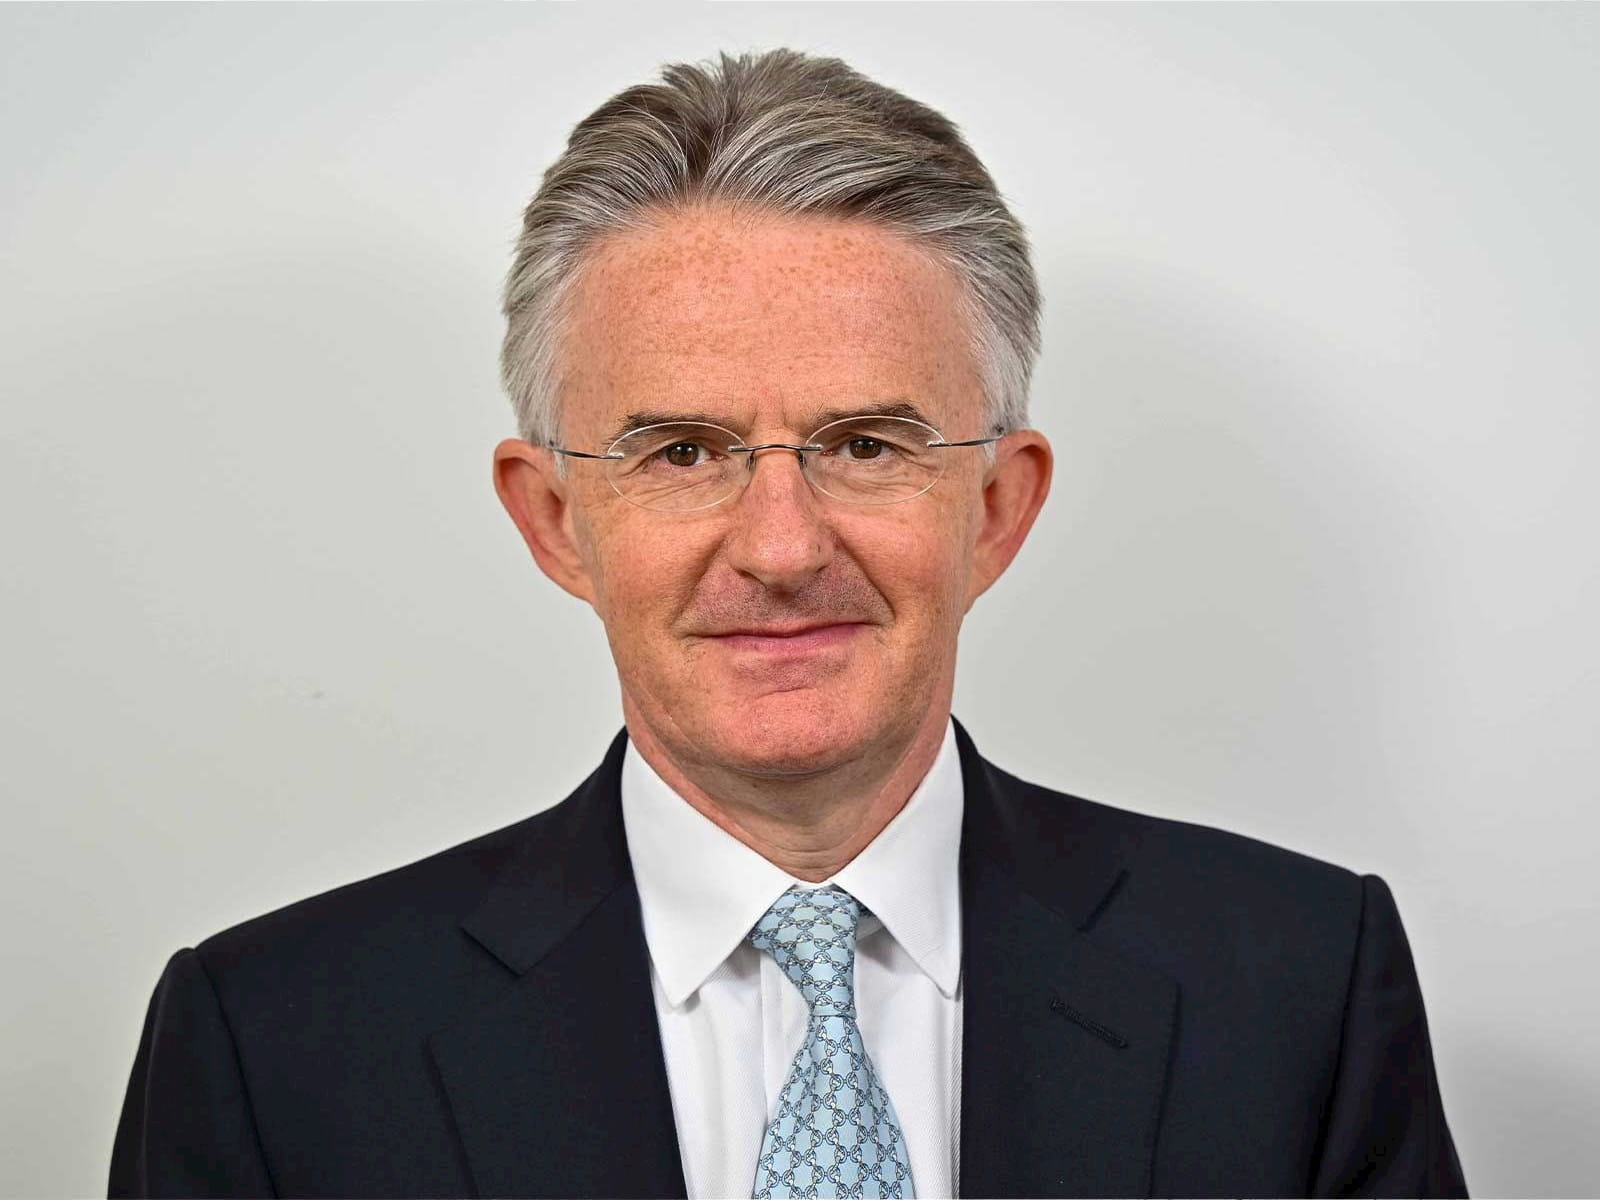 John Flint CHIEF EXECUTIVE OF THE UK INFRASTRUCTURE BANK AND FORMER GROUP CEO OF HSBC ICAEW Corporate Finance Faculty